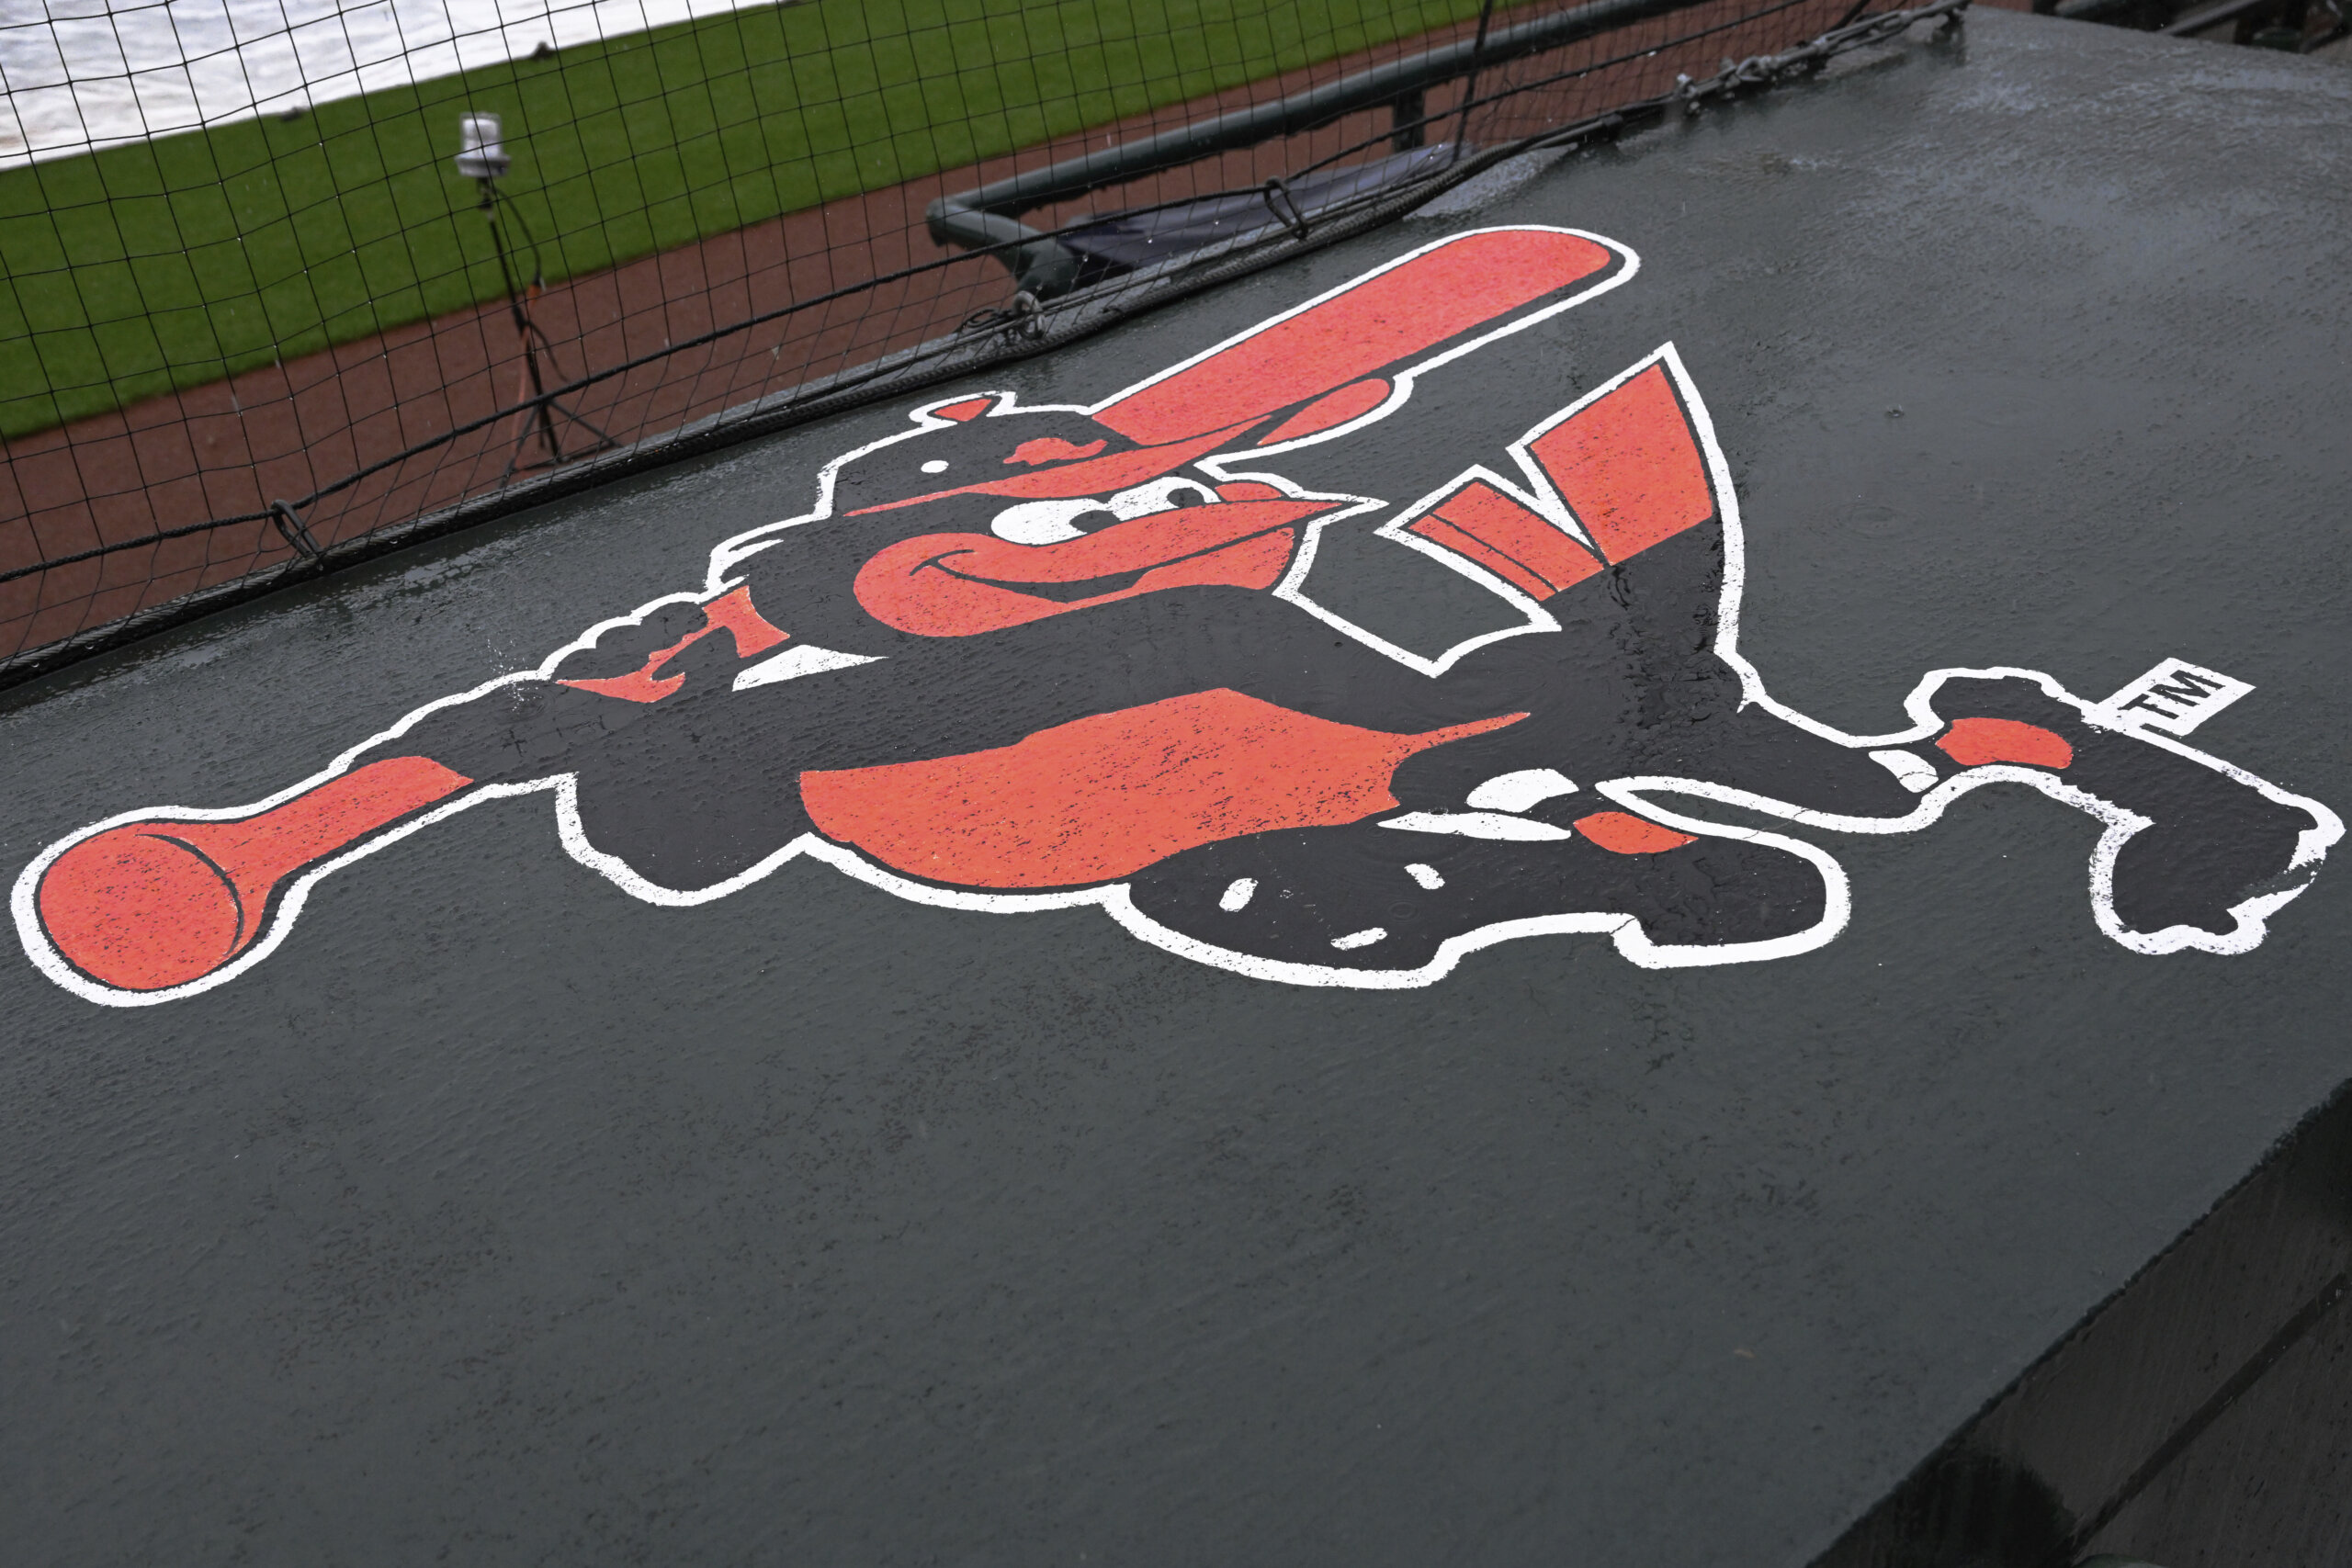 State high on sealing deal with Orioles but light on specifics - WTOP News